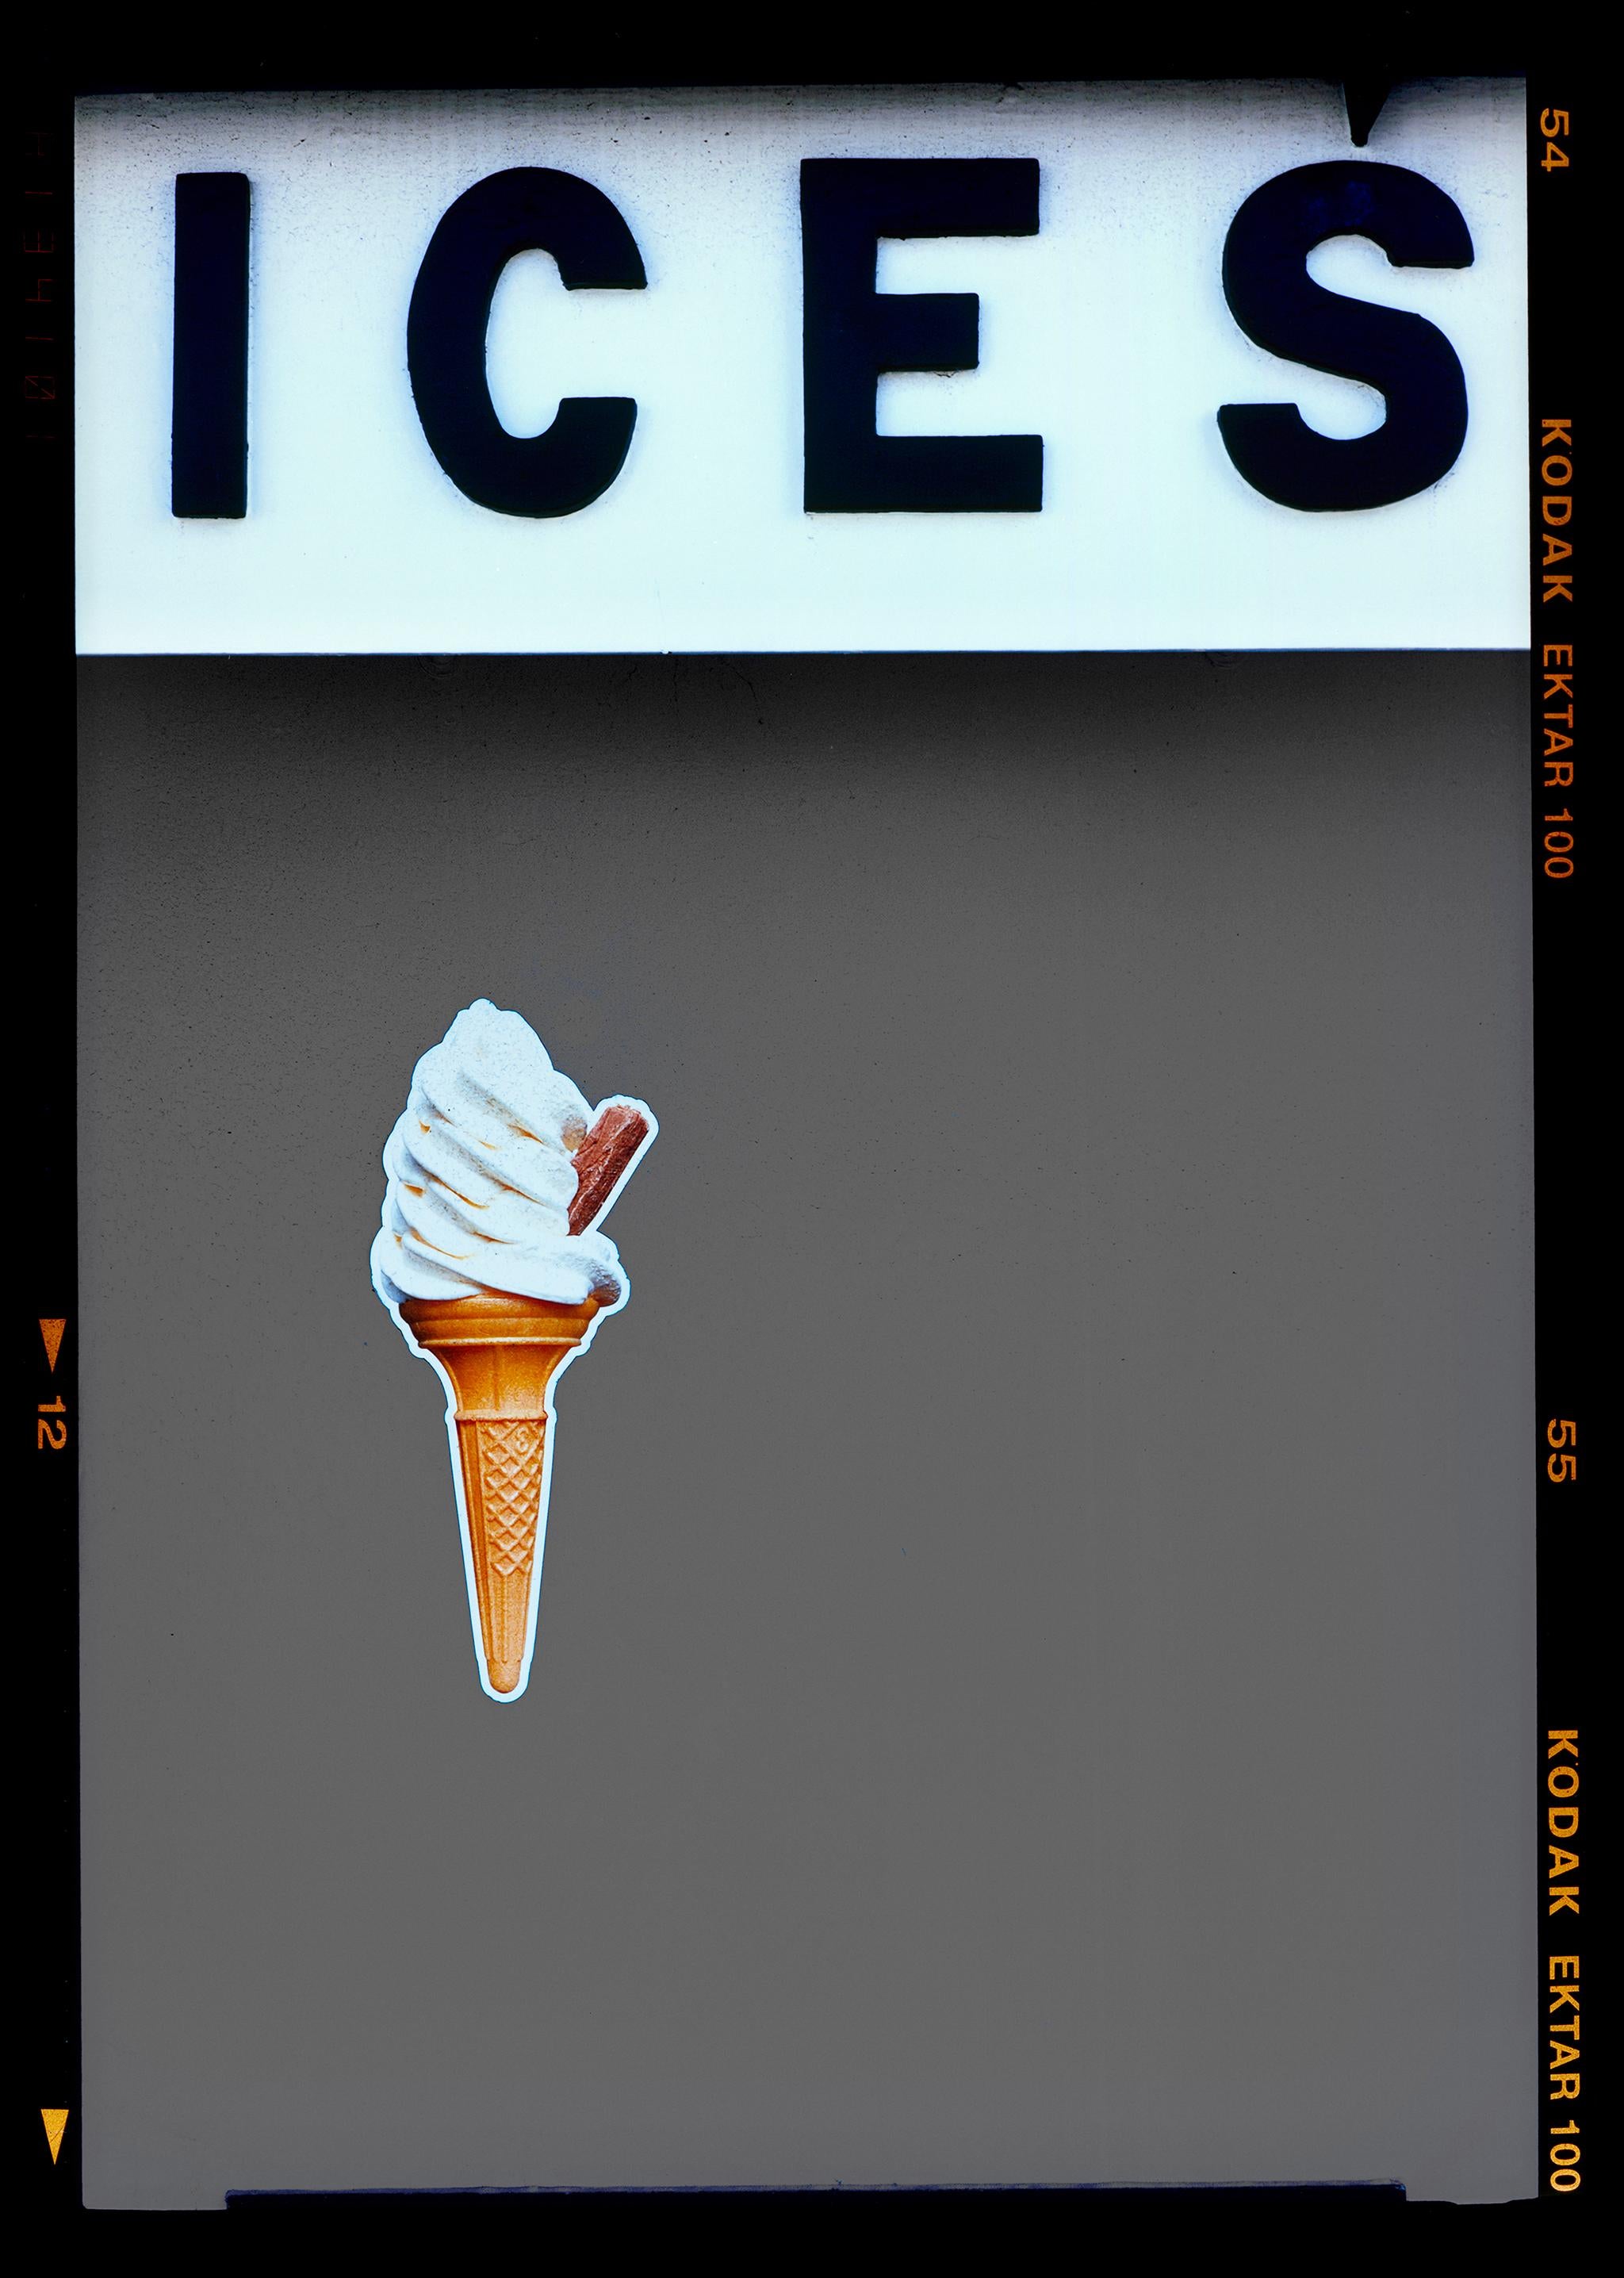 Richard Heeps Print - Ices (Grey), Bexhill-on-Sea - British seaside color photography